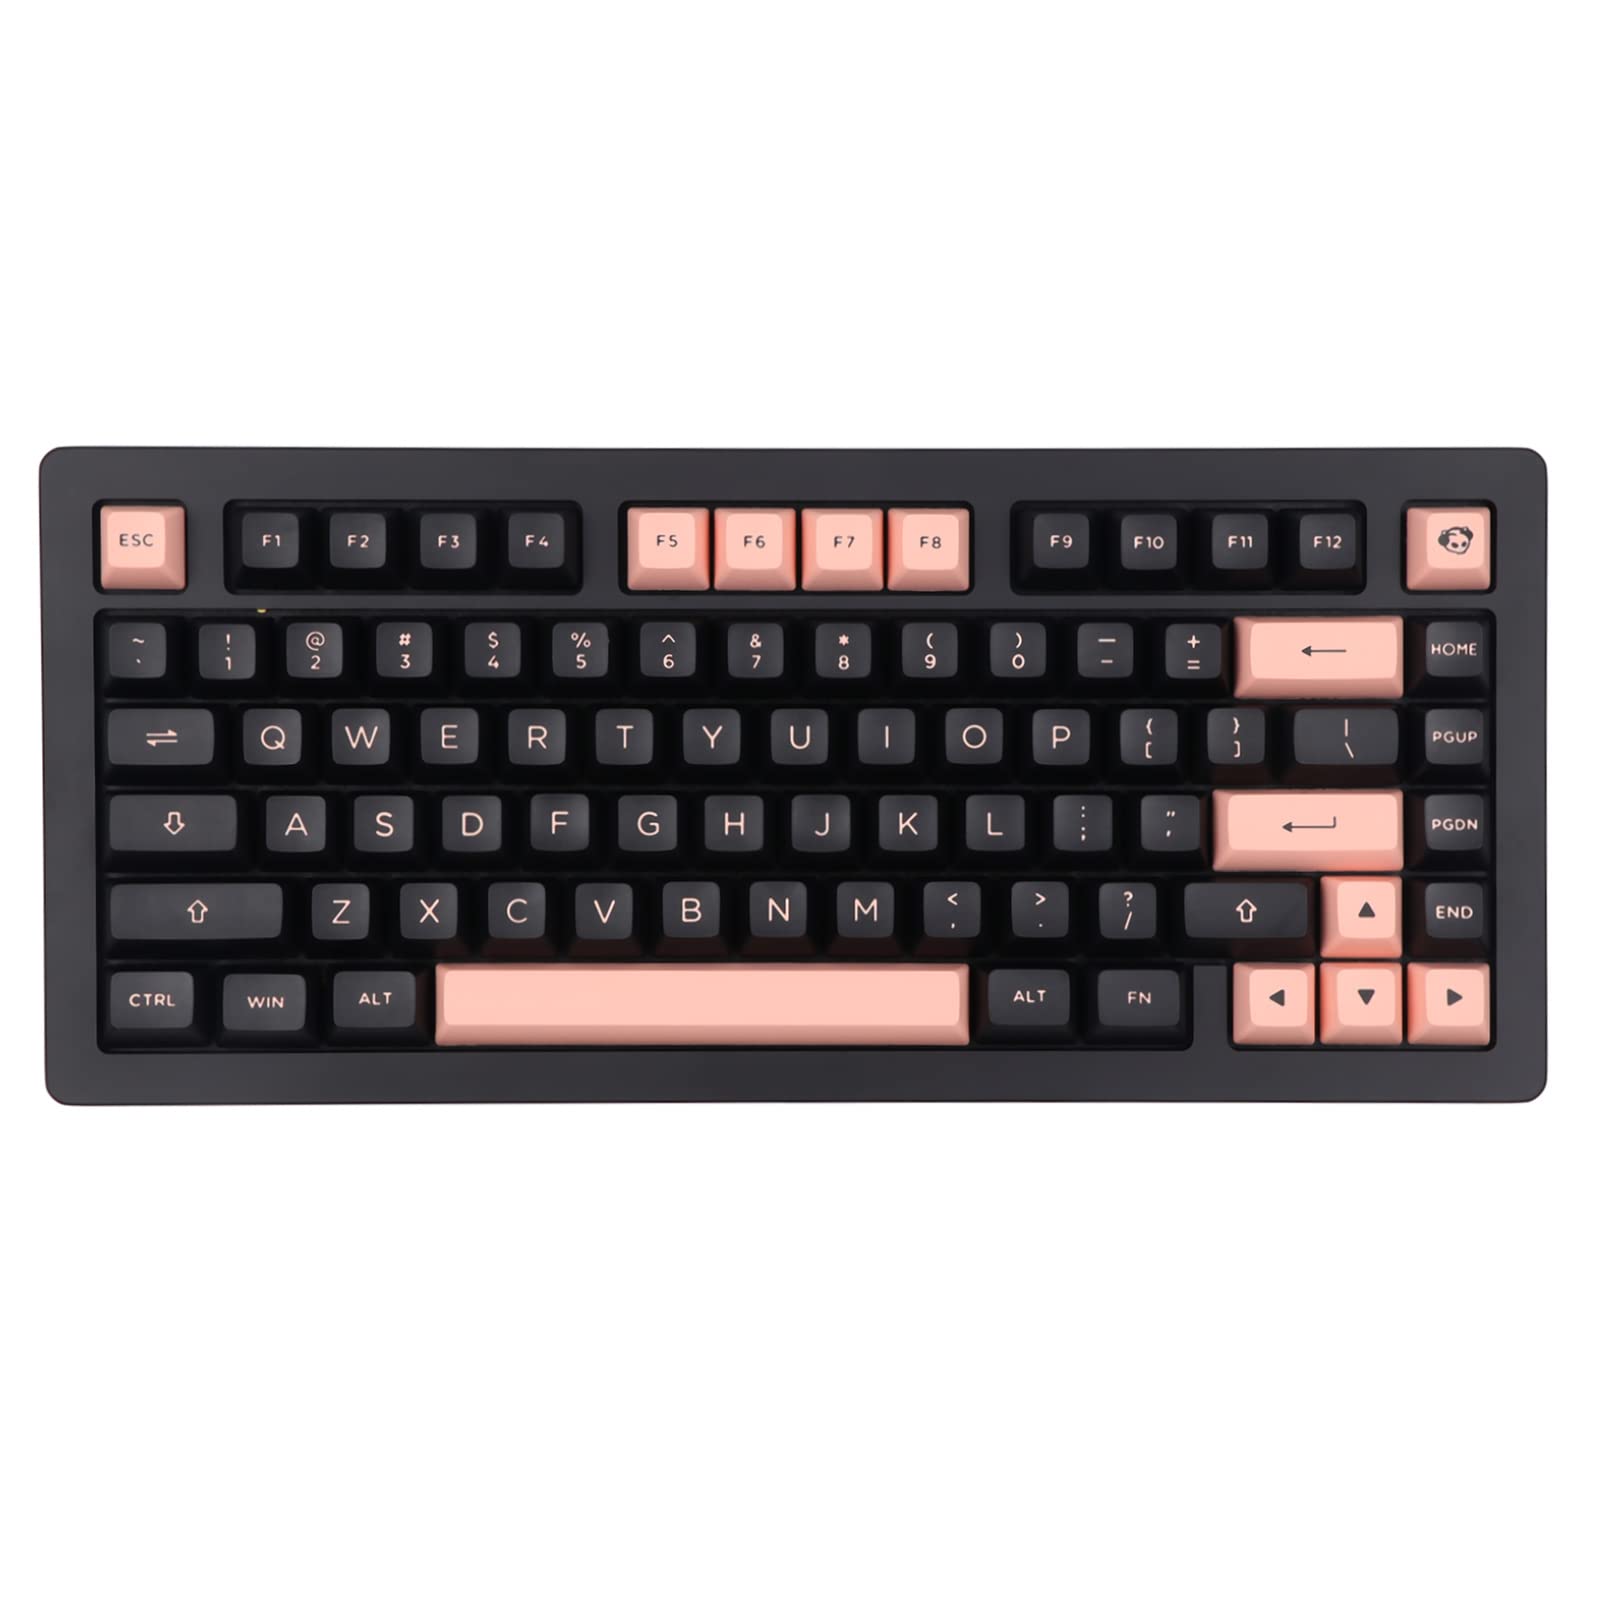 EPOMAKER AKKO ACR PRO 75S Black Pink 81 Keys Gasket Mount Hot Swappable Wired Mechanical Gaming Keyboard, PC Plate, Poron/EVA Foam, Acrylic CNC Case, Pre-lubed Stabilizer for Mac/Win